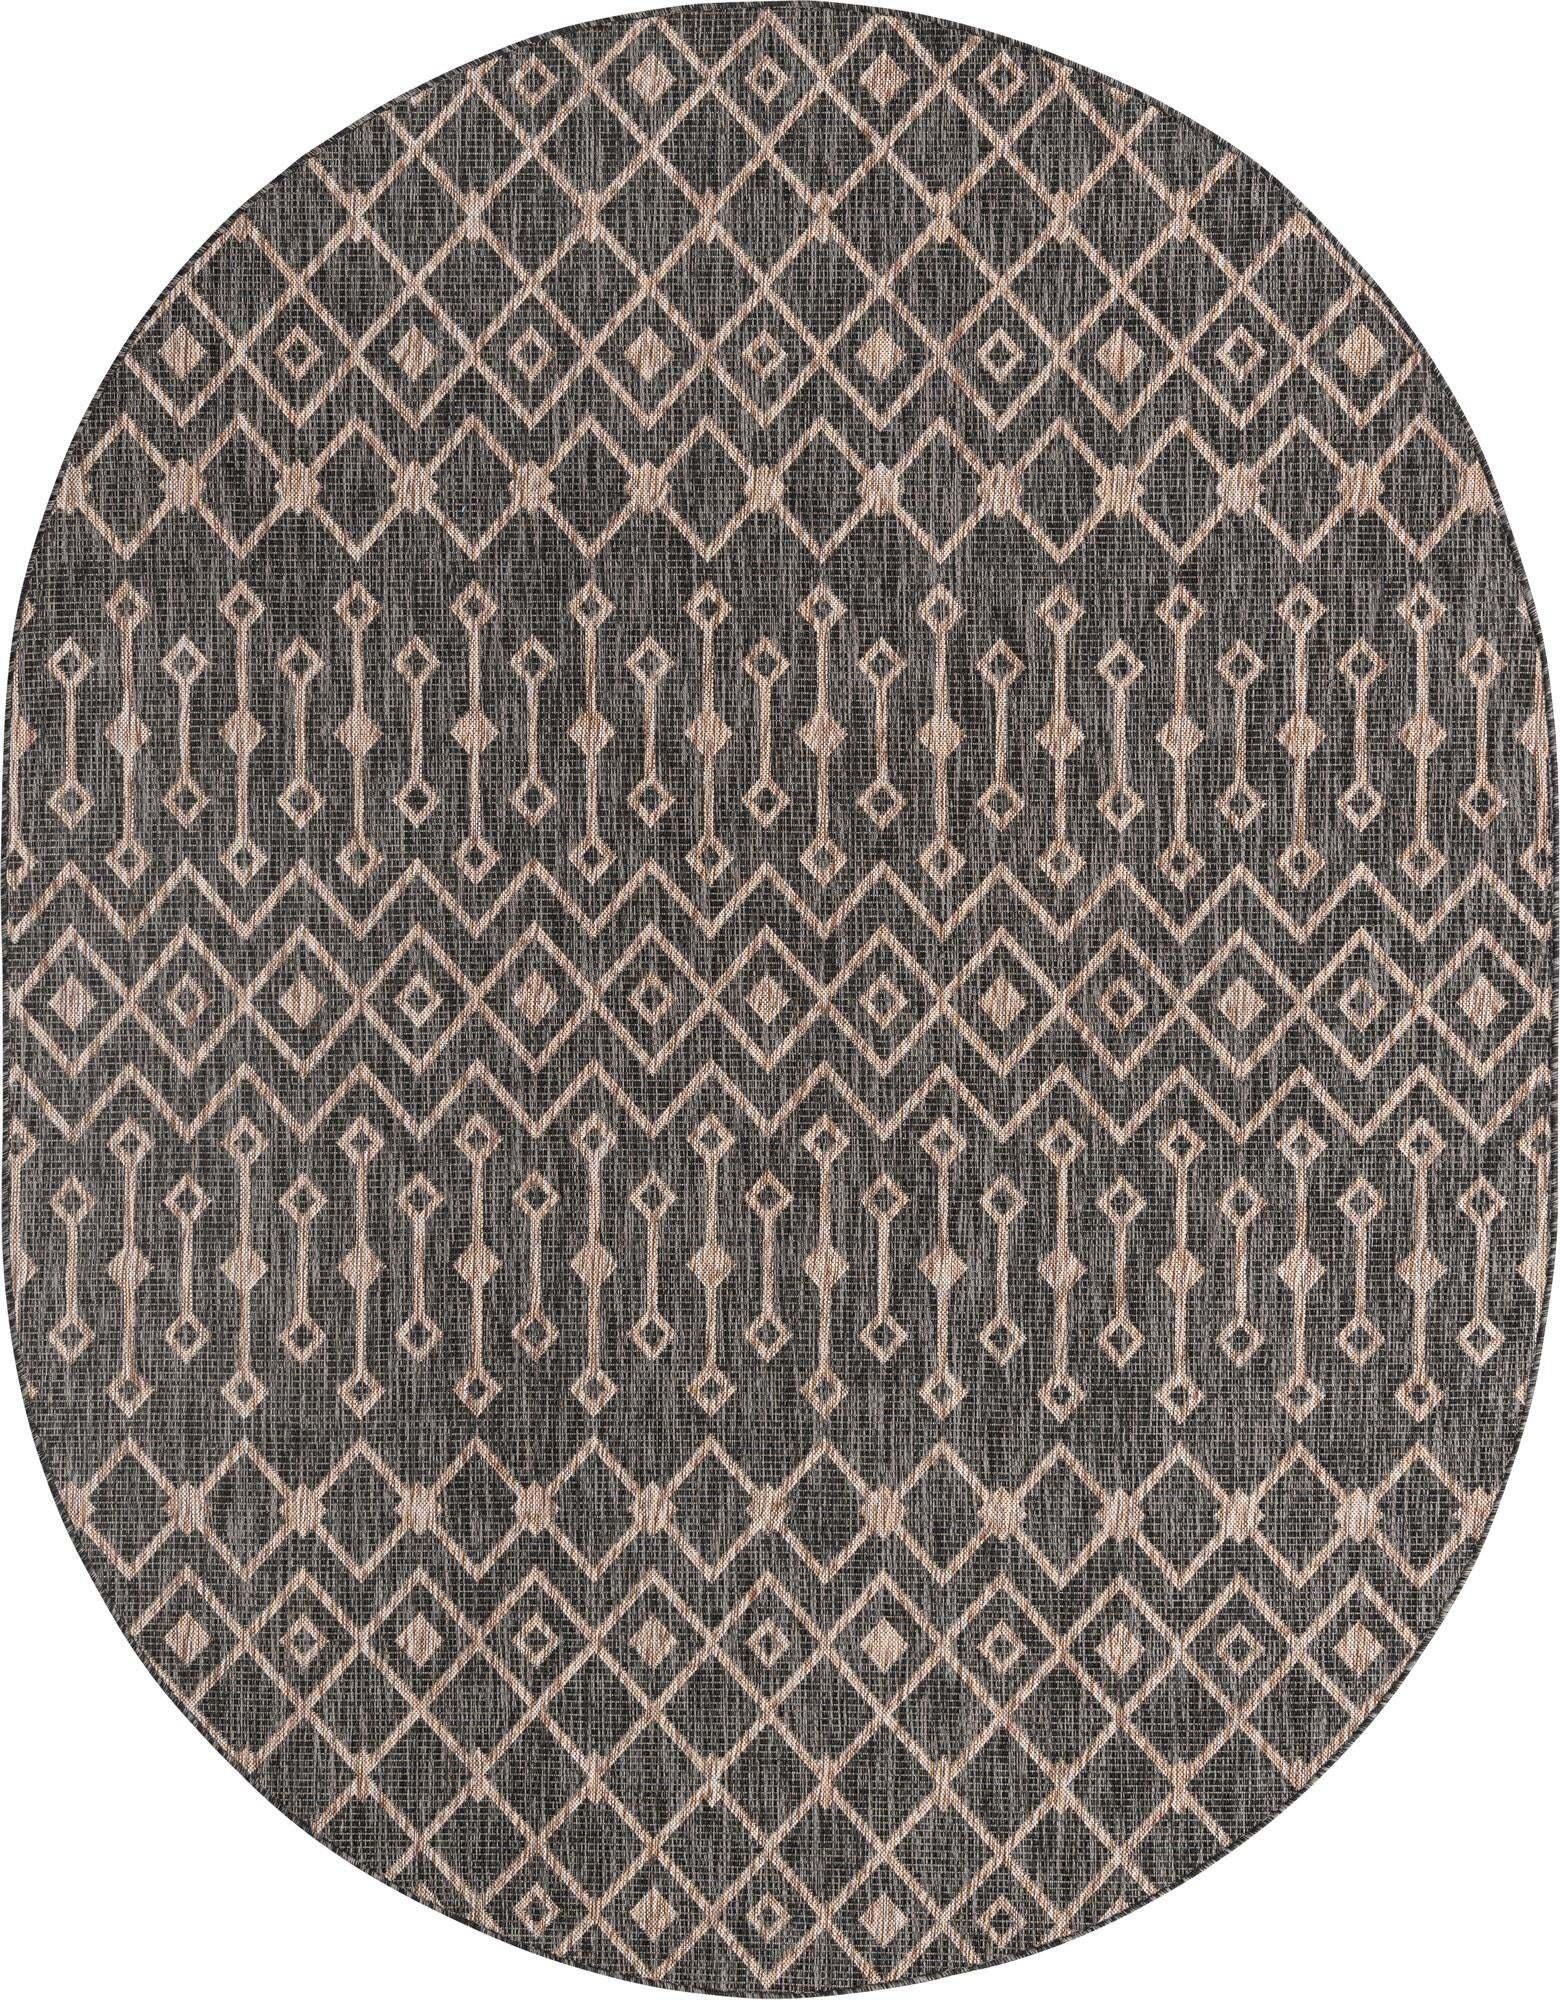 Unique Loom Outdoor Rugs - Outdoor Trellis Geometric Oval 8x10 Oval Rug Charcoal Gray & Beige